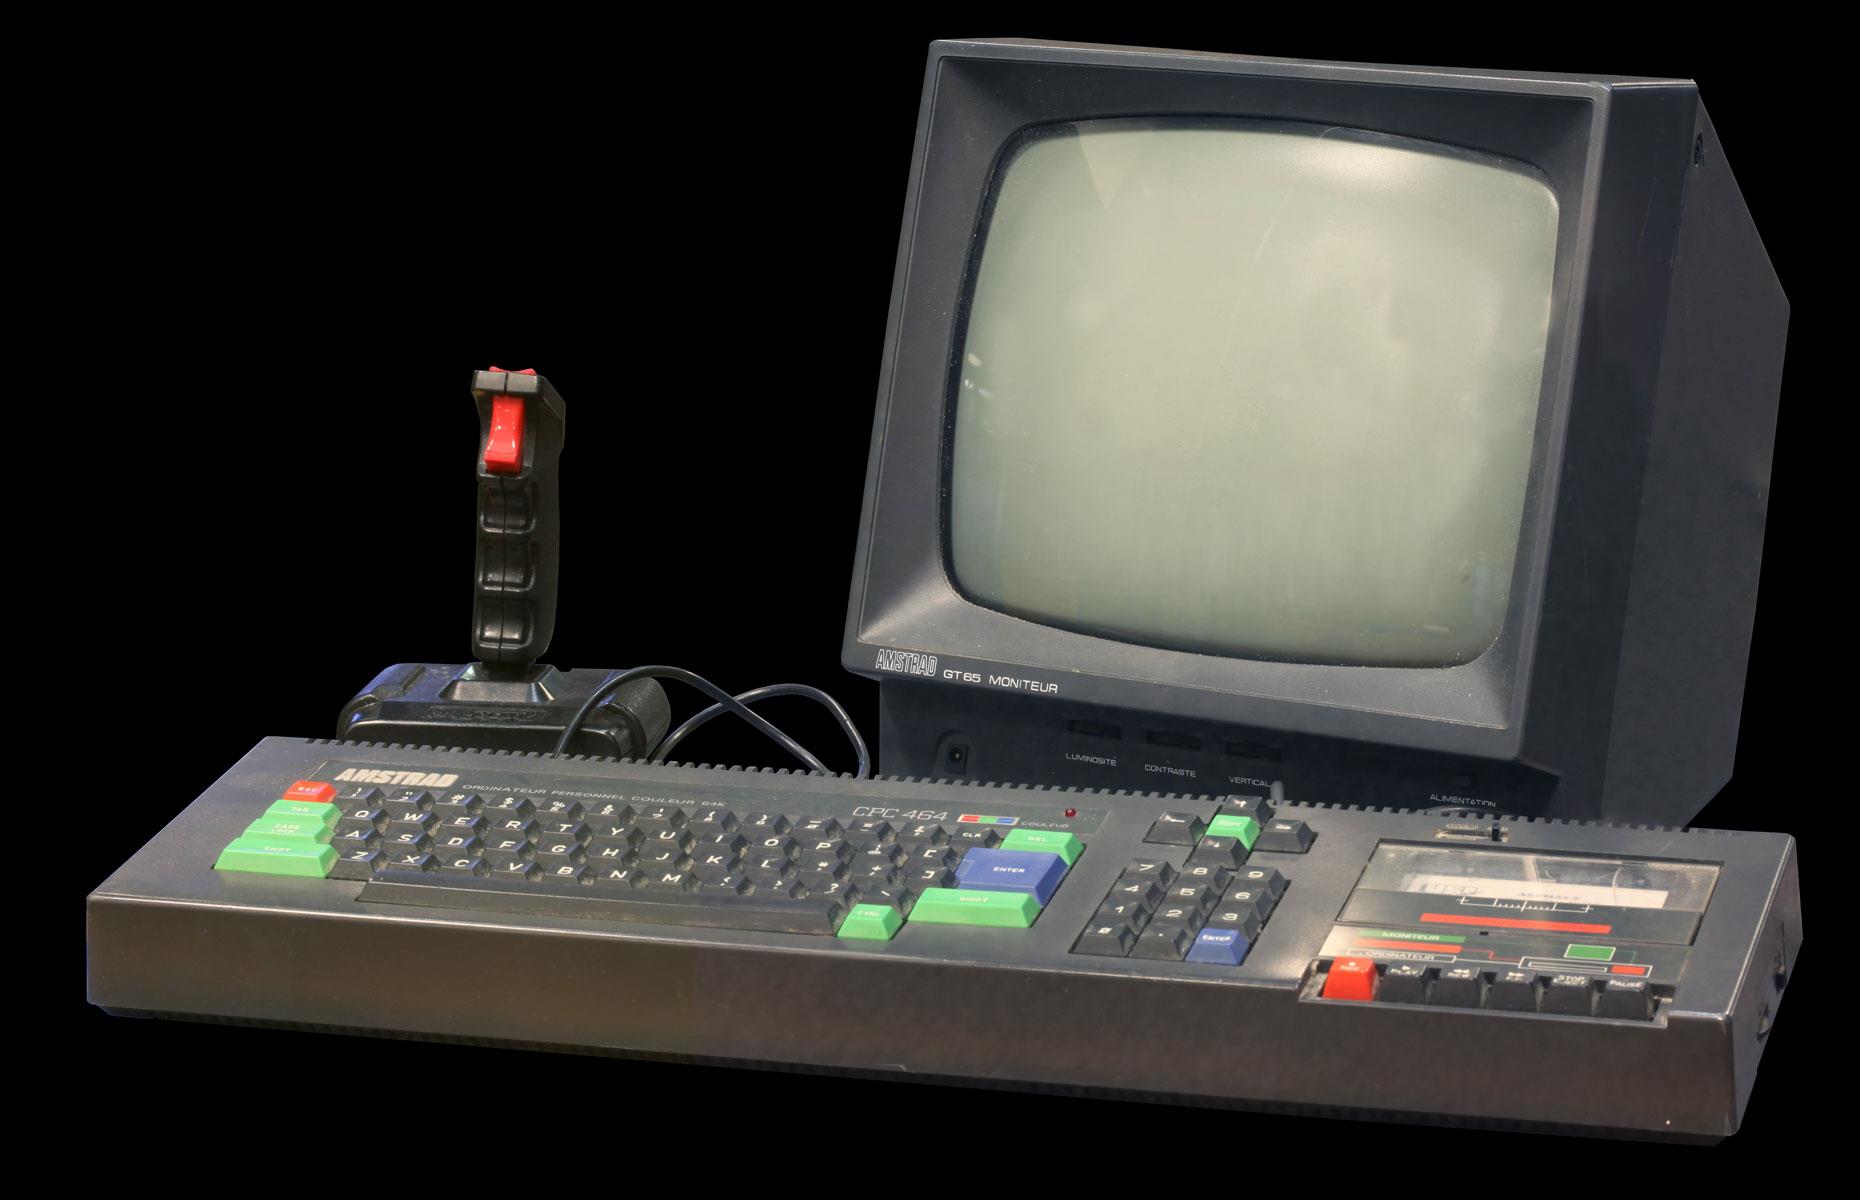 Amstrad CPC 464: up to $280 (£225)